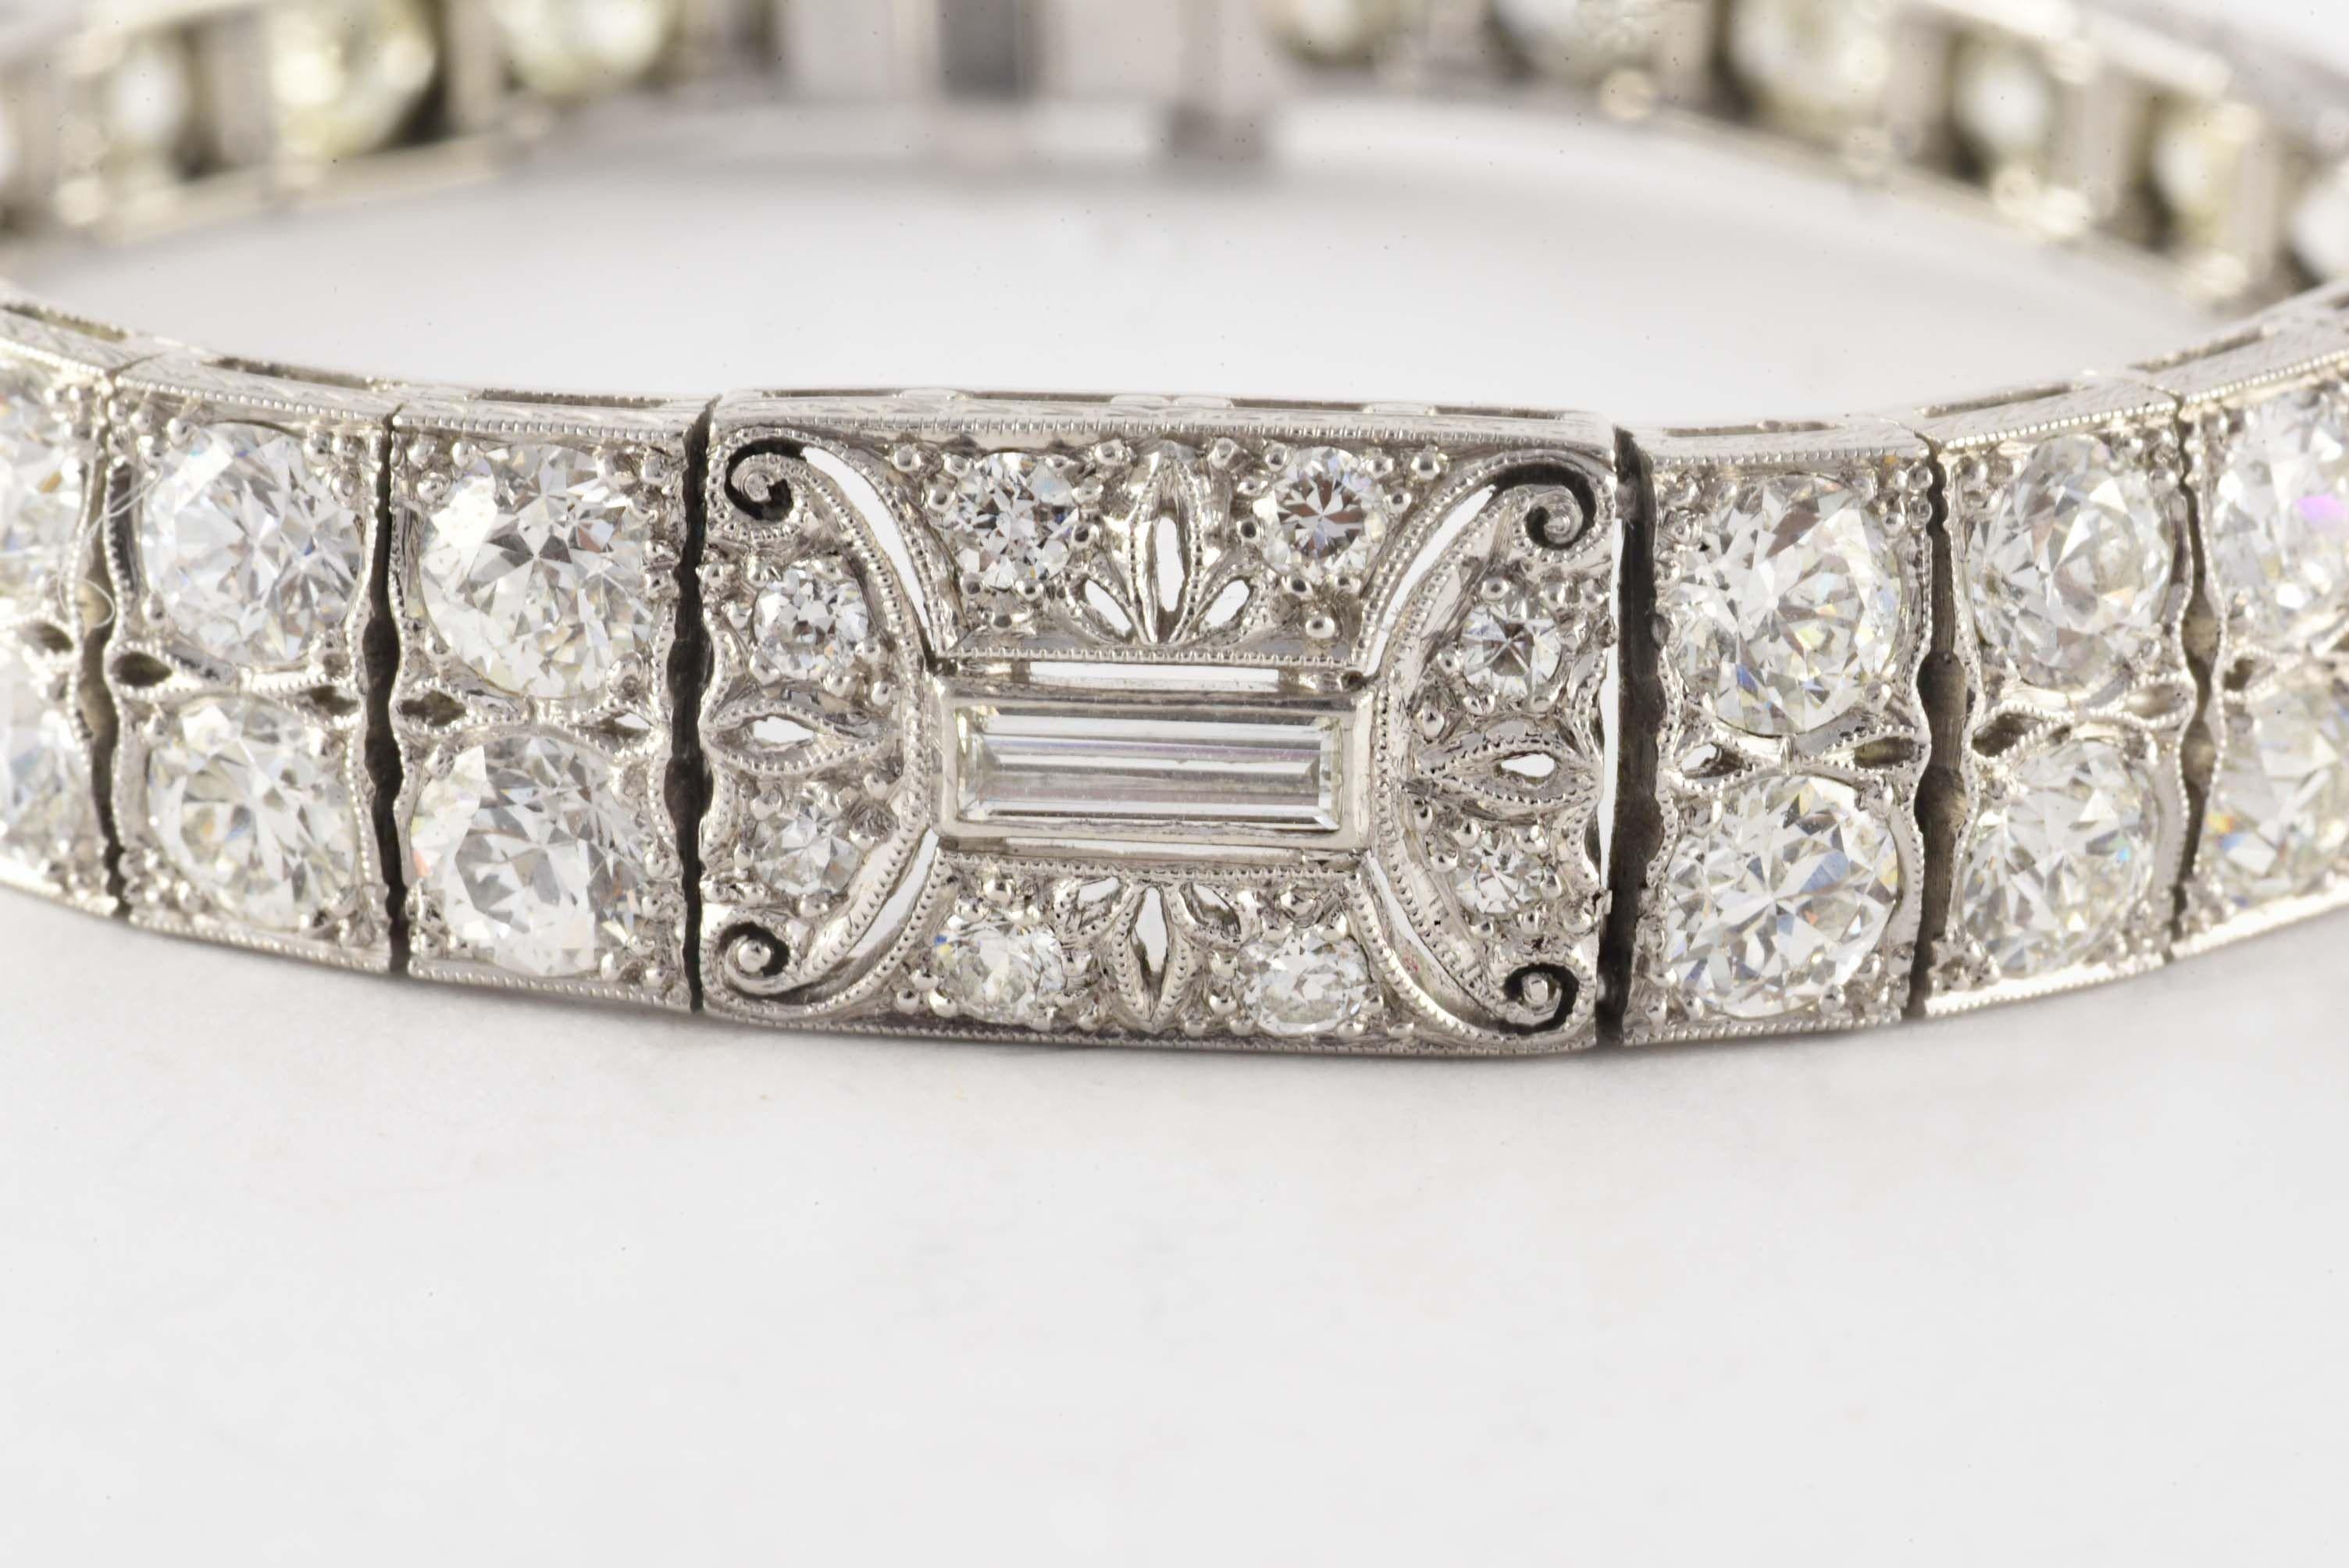 This classic Art Deco bracelet features a mix of fifty-eight Old European cut, single cut and baguette-shaped diamonds, G-H color, VS-SI clarity, totaling approximately 9.56 carats within a subtle geometric design and accented with twelve special